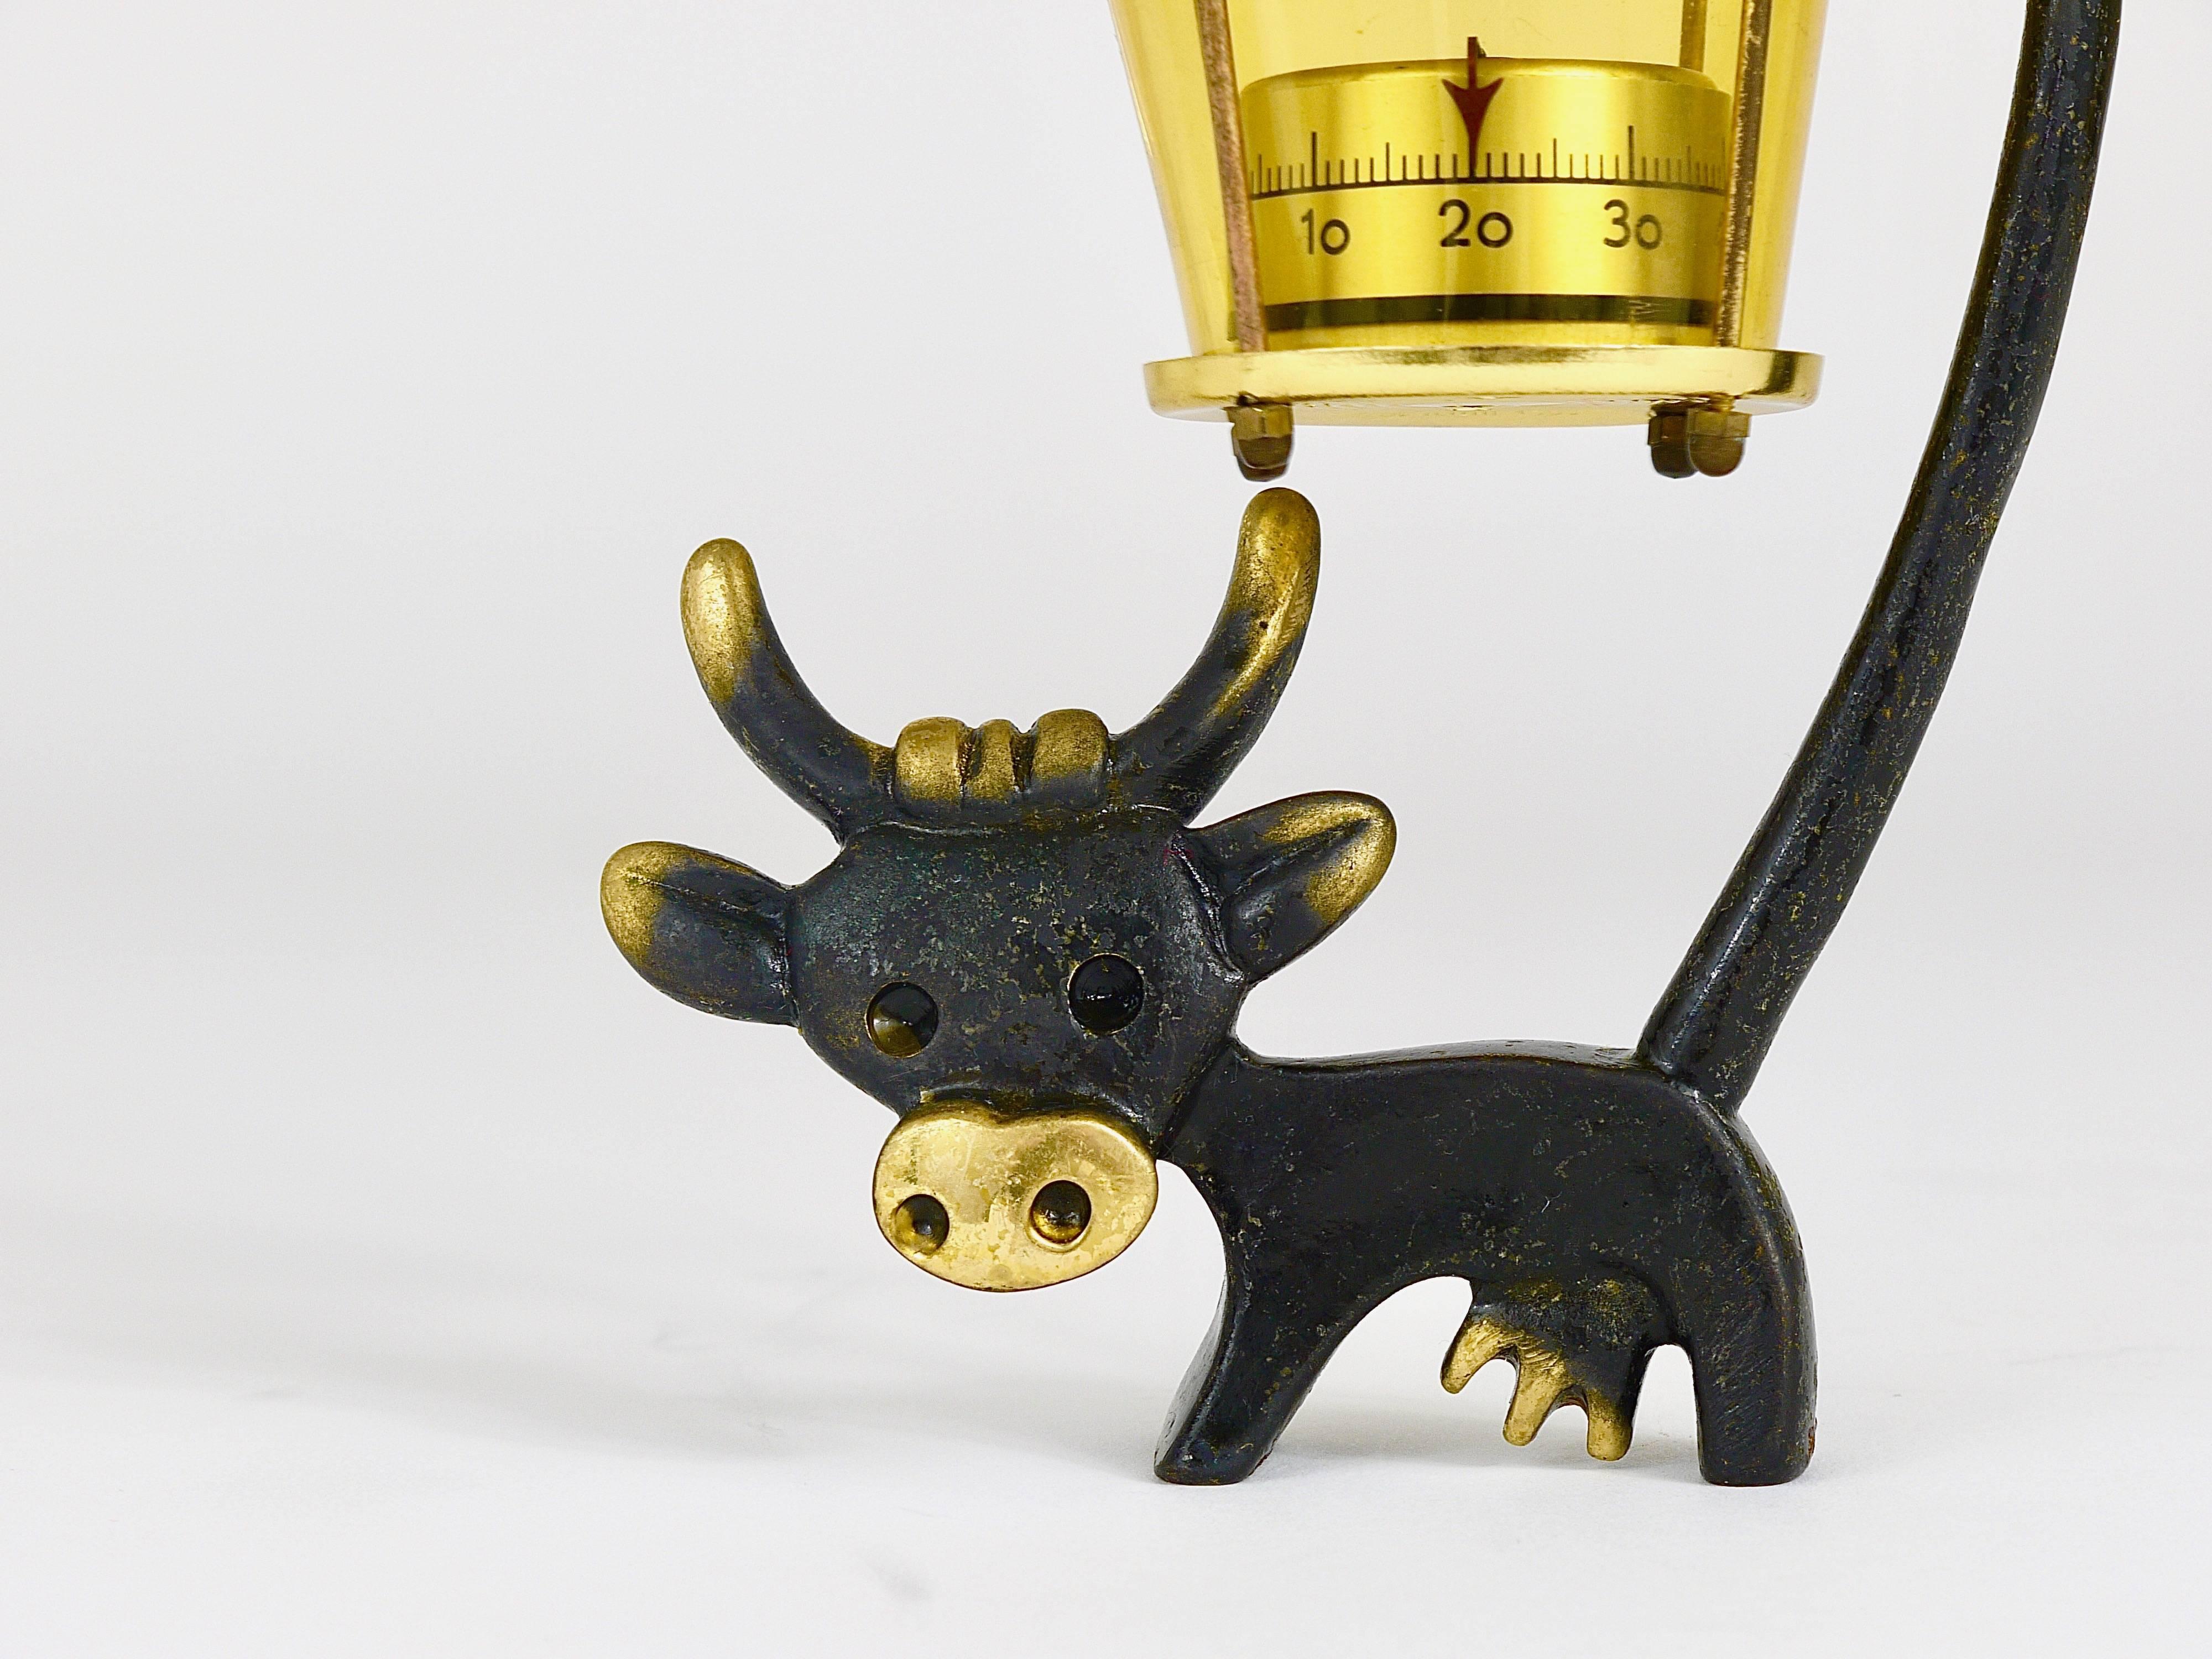 A charming Austrian desk thermometer, consisting of a nice cow figurine and a lantern-shaped thermometer. A humorous design by Walter Bosse, executed by Herta Baller Austria in the 1950s. Made of brass, in good condition with marginal patina.